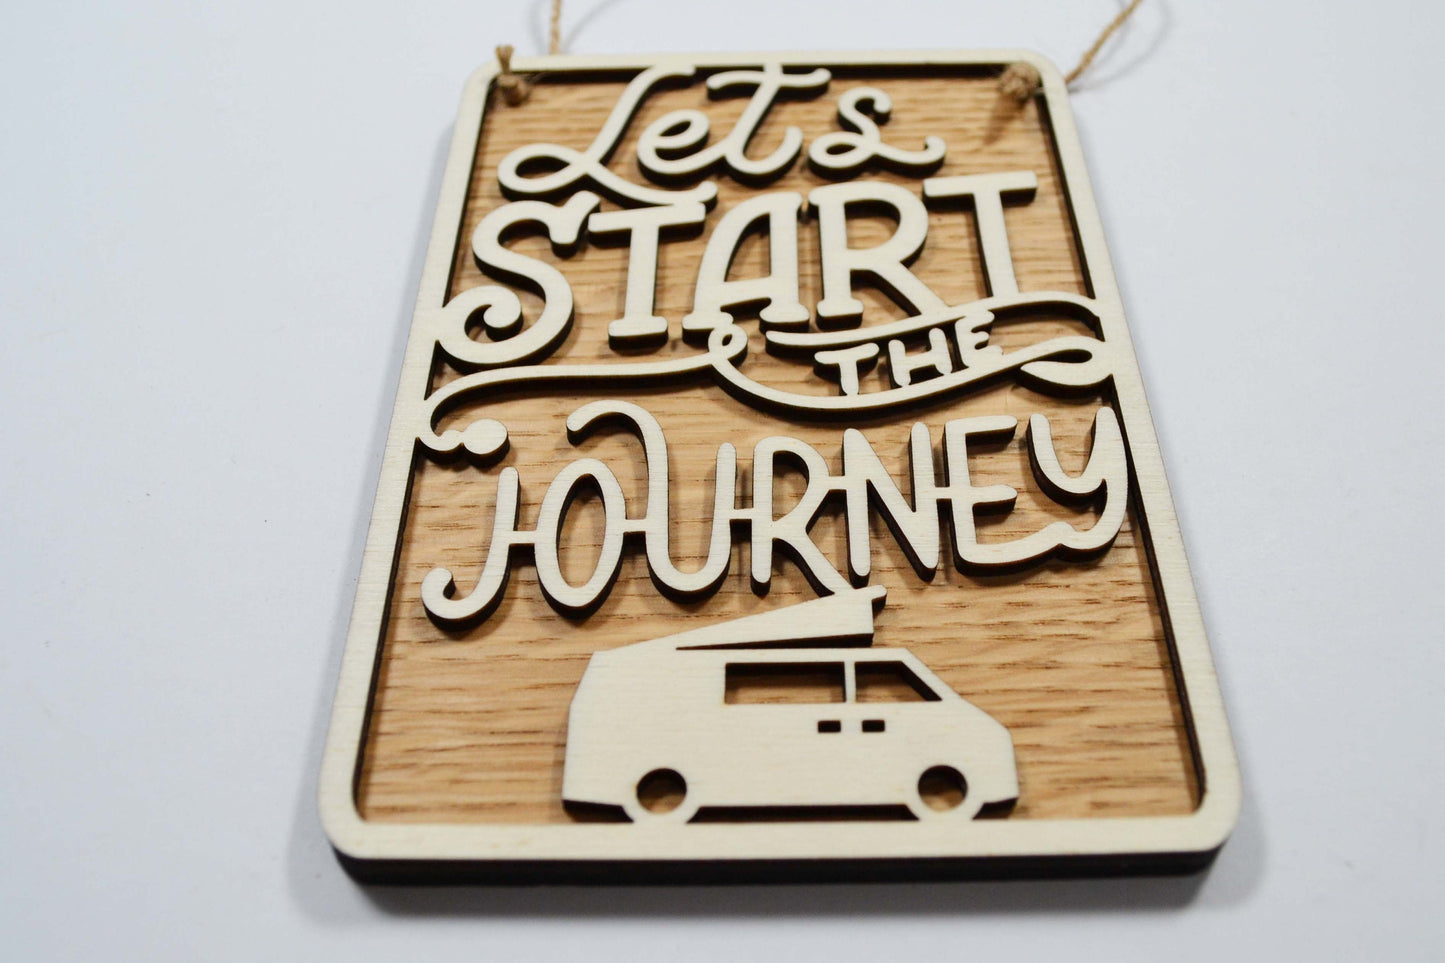 Let's Start The Journey - Personalised Sign